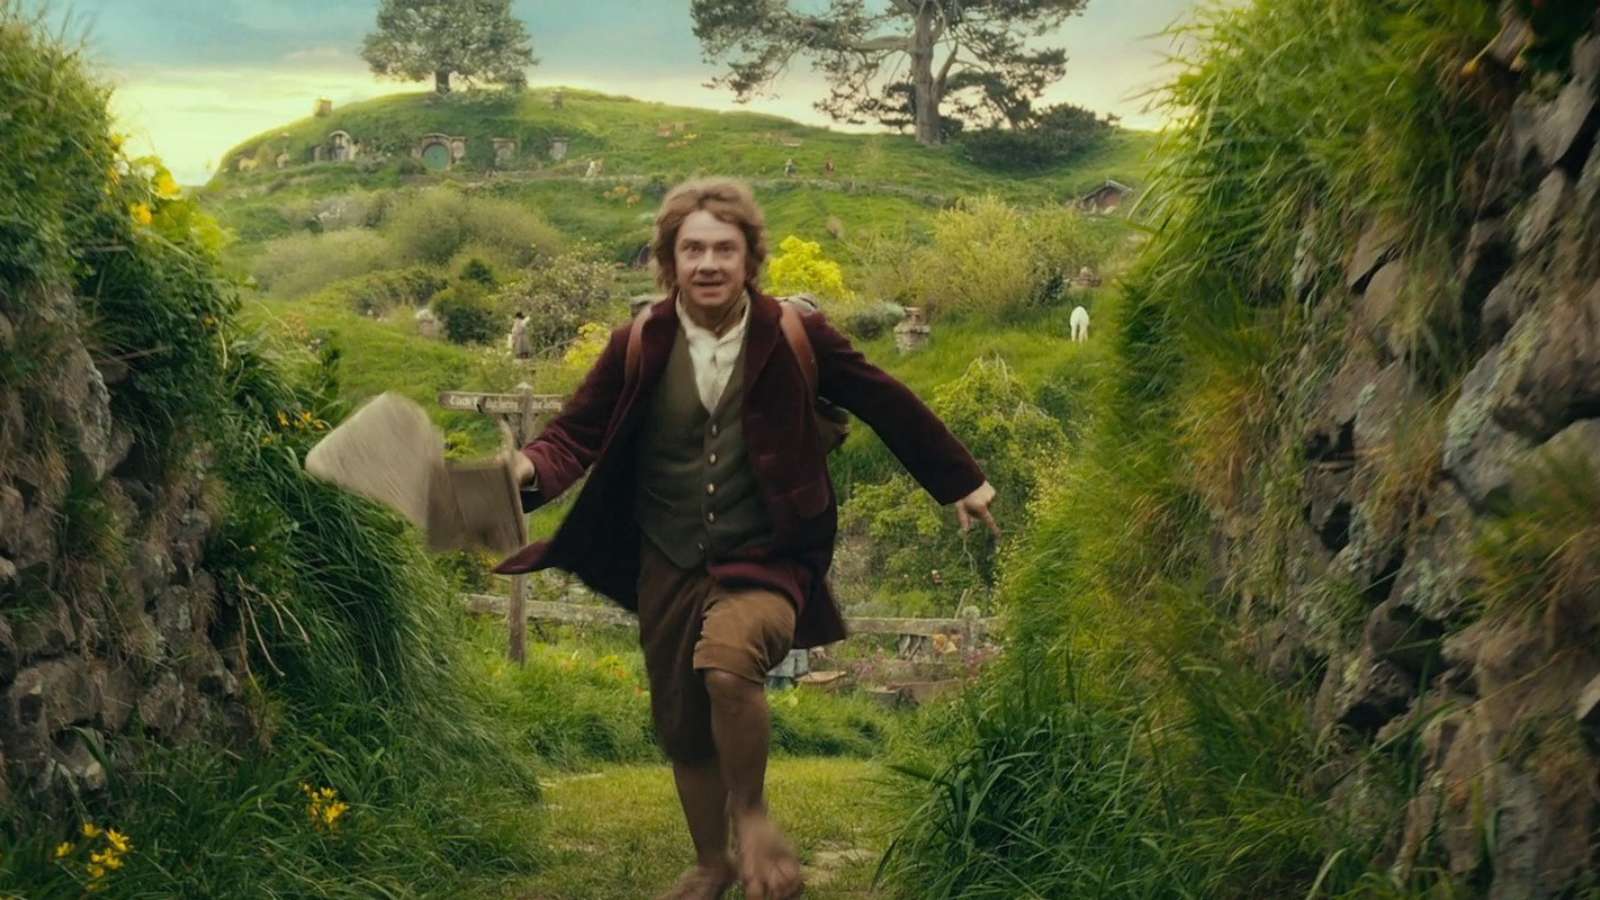 Bilbo Baggins, a young hobbit, runs through the lush green hills of the Shire in Middle-earth